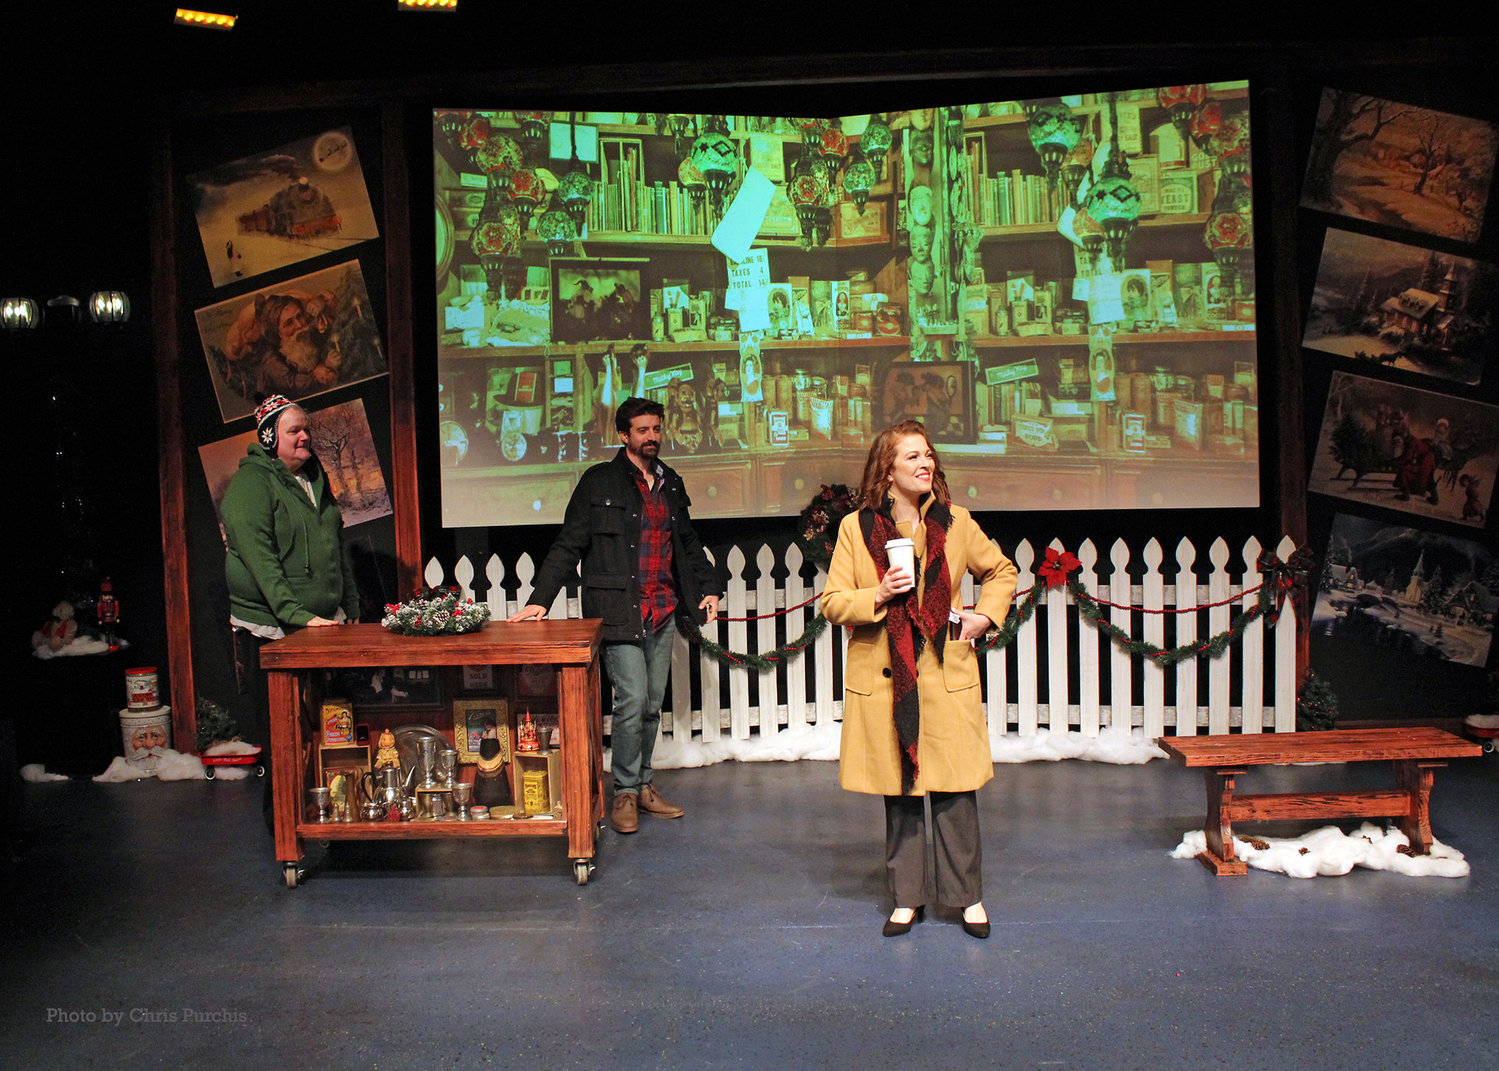 Danny (Joe Bailey), George (Ryan Patrick Welsh) and Felice (Dani Cochrane) in the world premiere of the Williamston Theatre’s production of “A Very Williamston Christmas” by Robert Hawlmark.